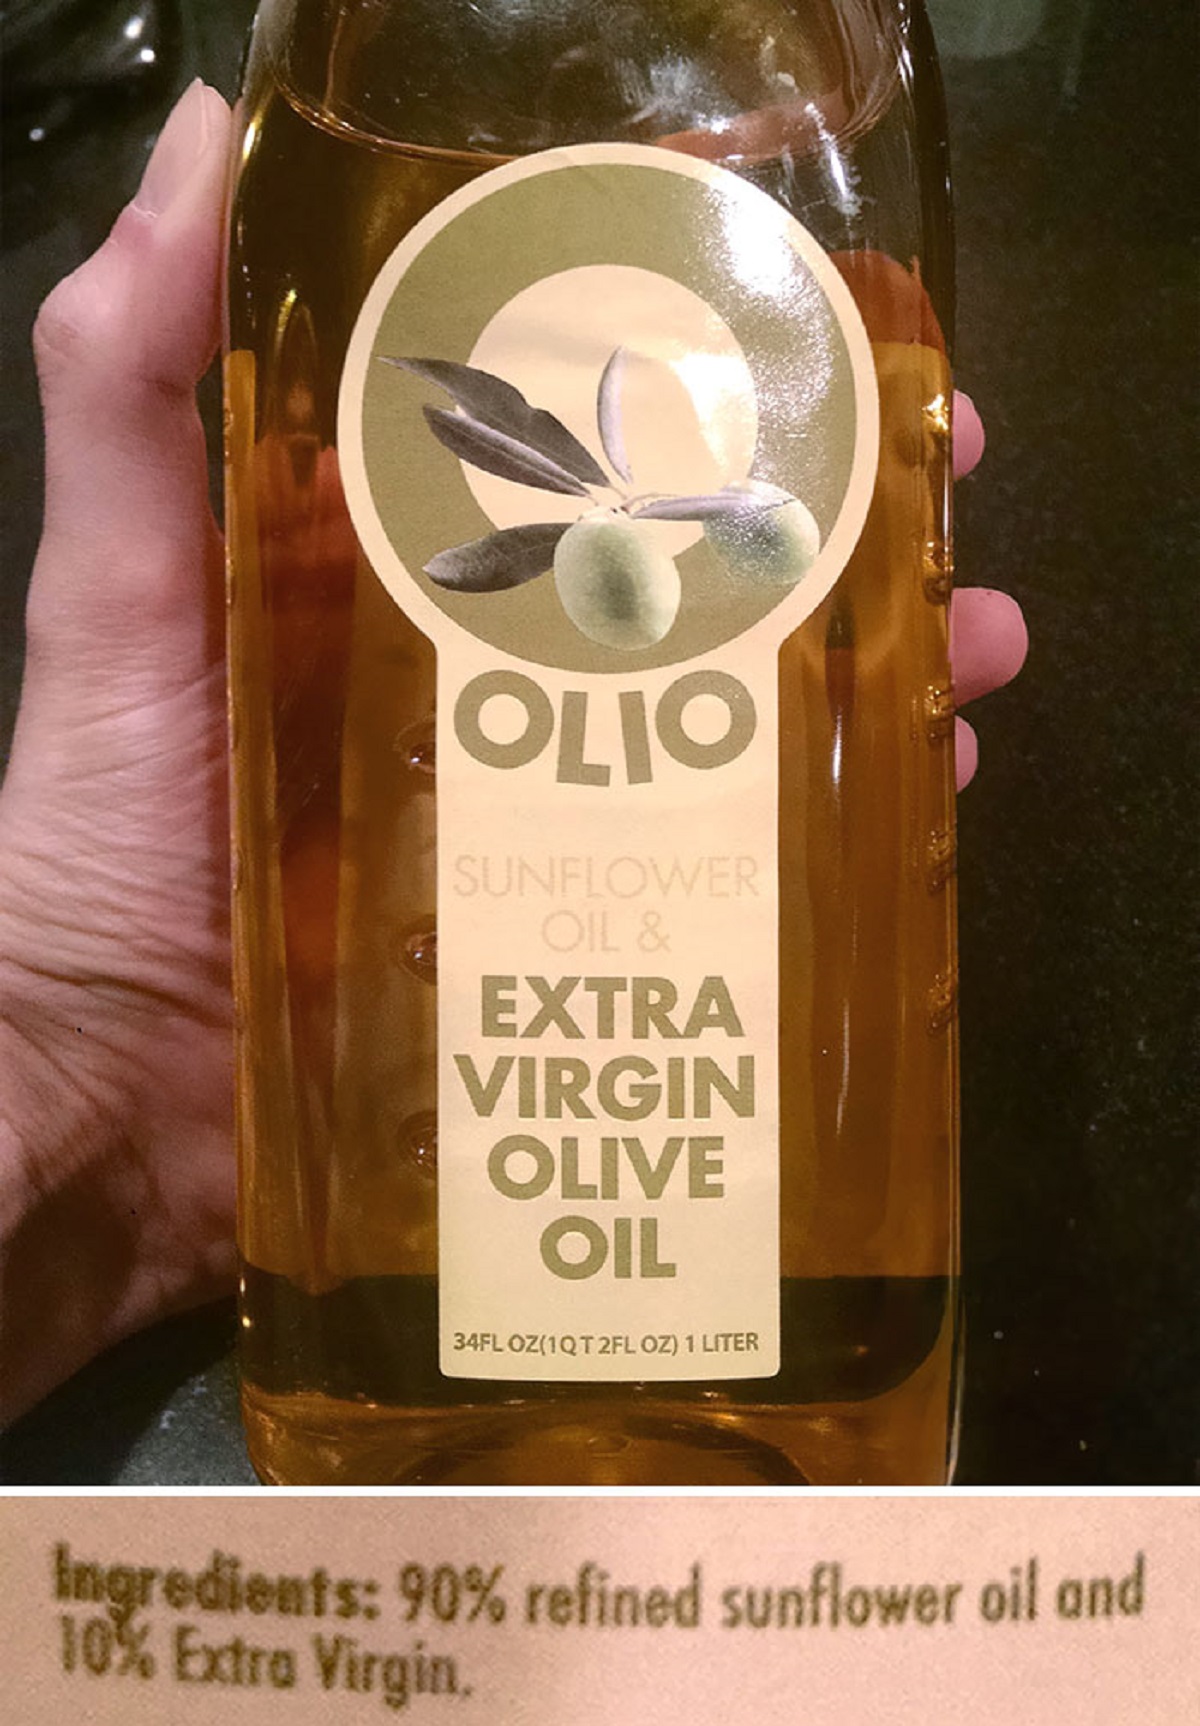 This Olive Oil I Bought Wasn't Even Cheap